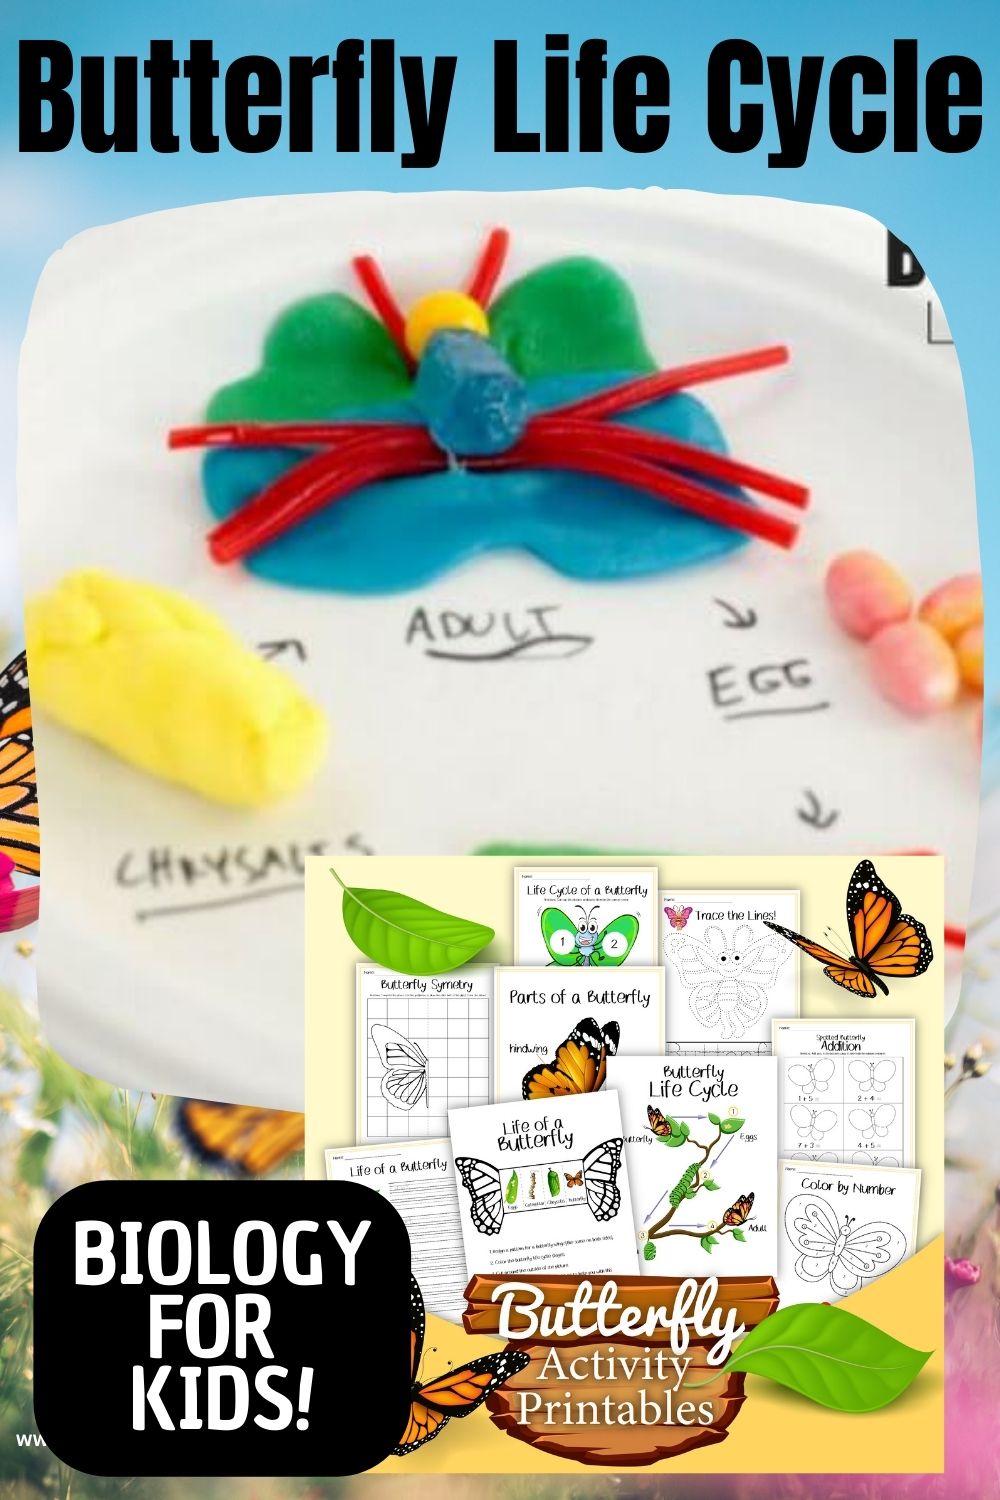 Edible Butterfly Life Cycle